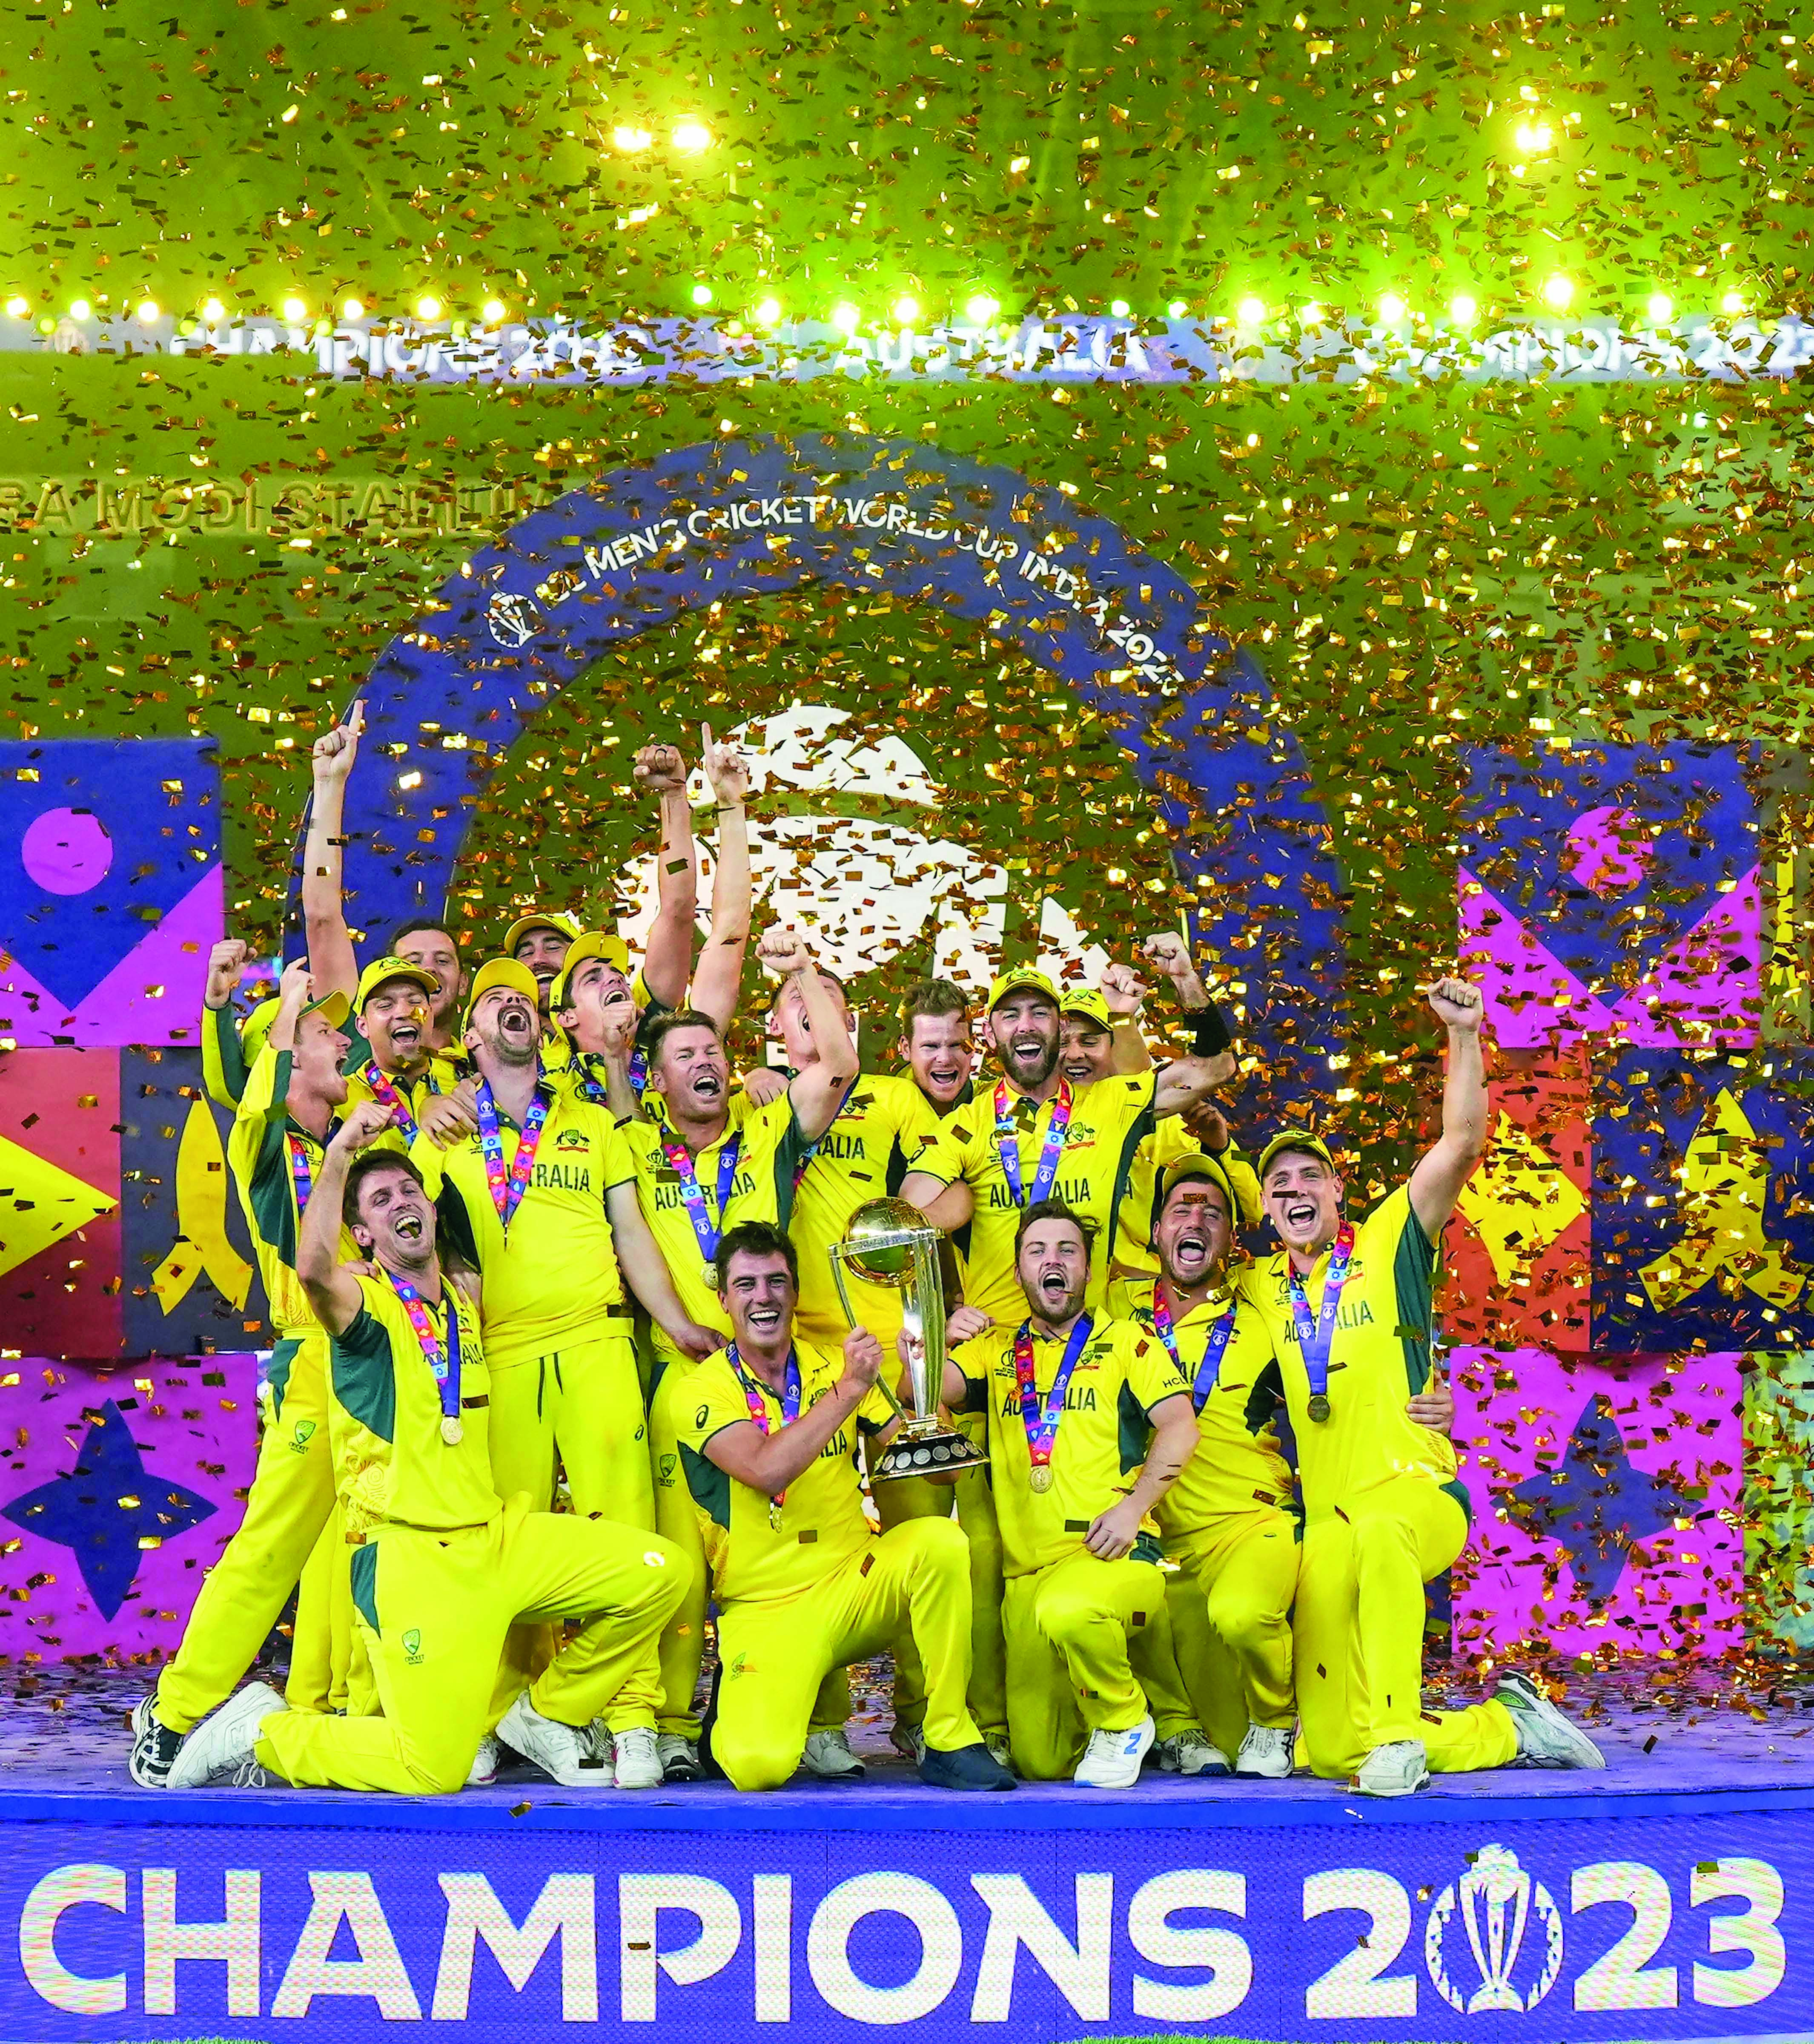 Australia HEAD home with 6th WC title